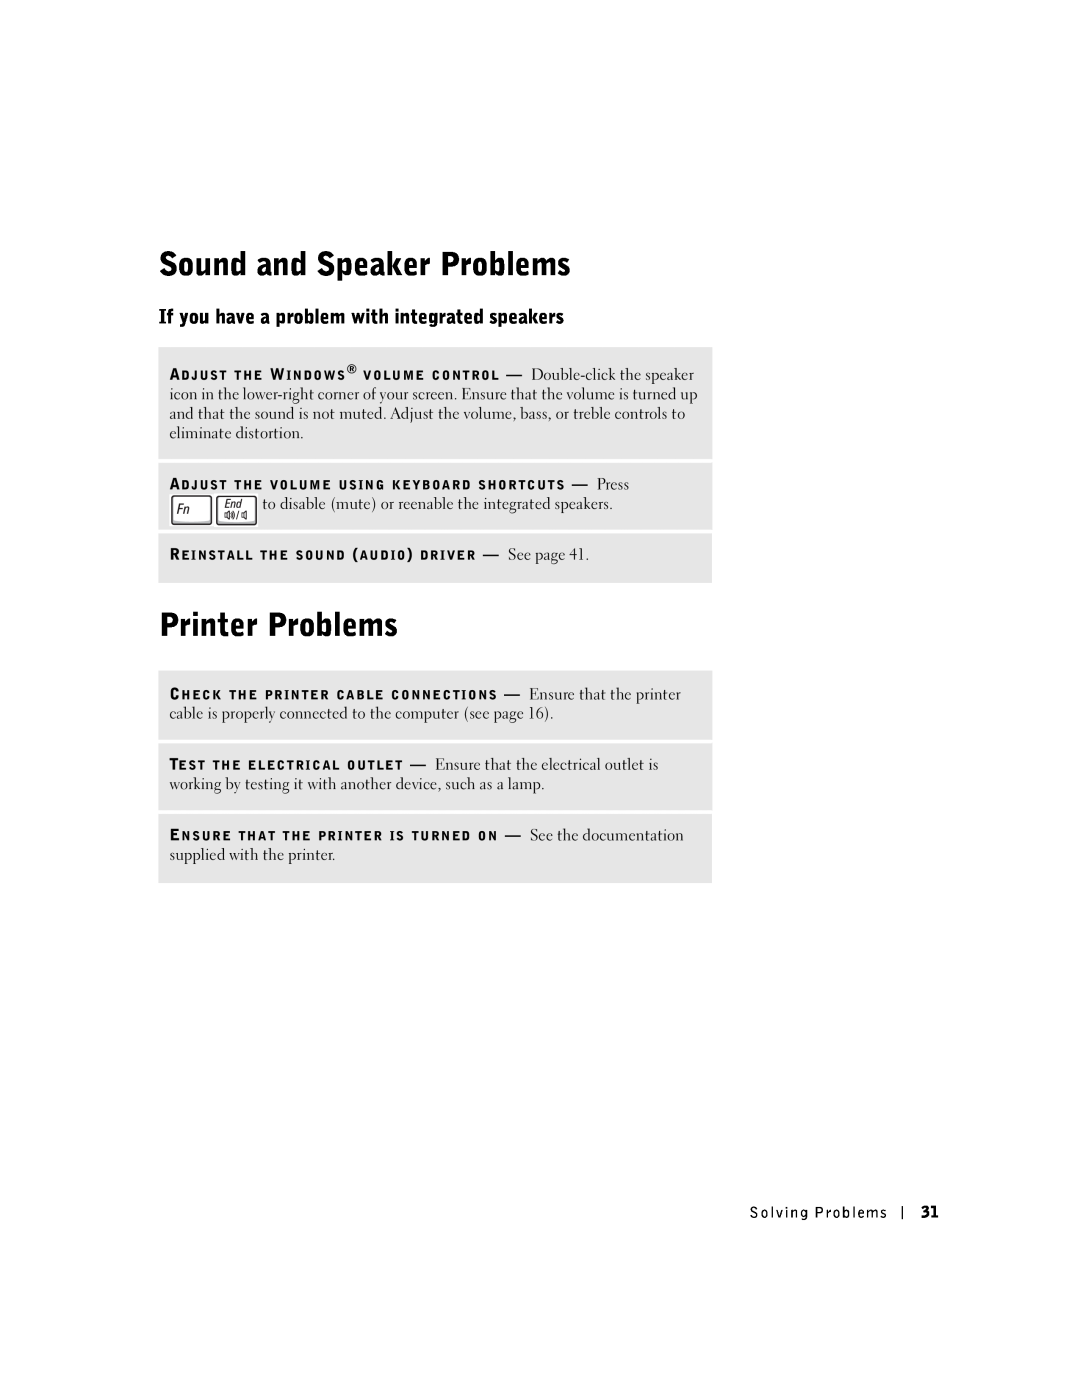 Dell 100N owner manual Sound and Speaker Problems, Printer Problems, If you have a problem with integrated speakers 